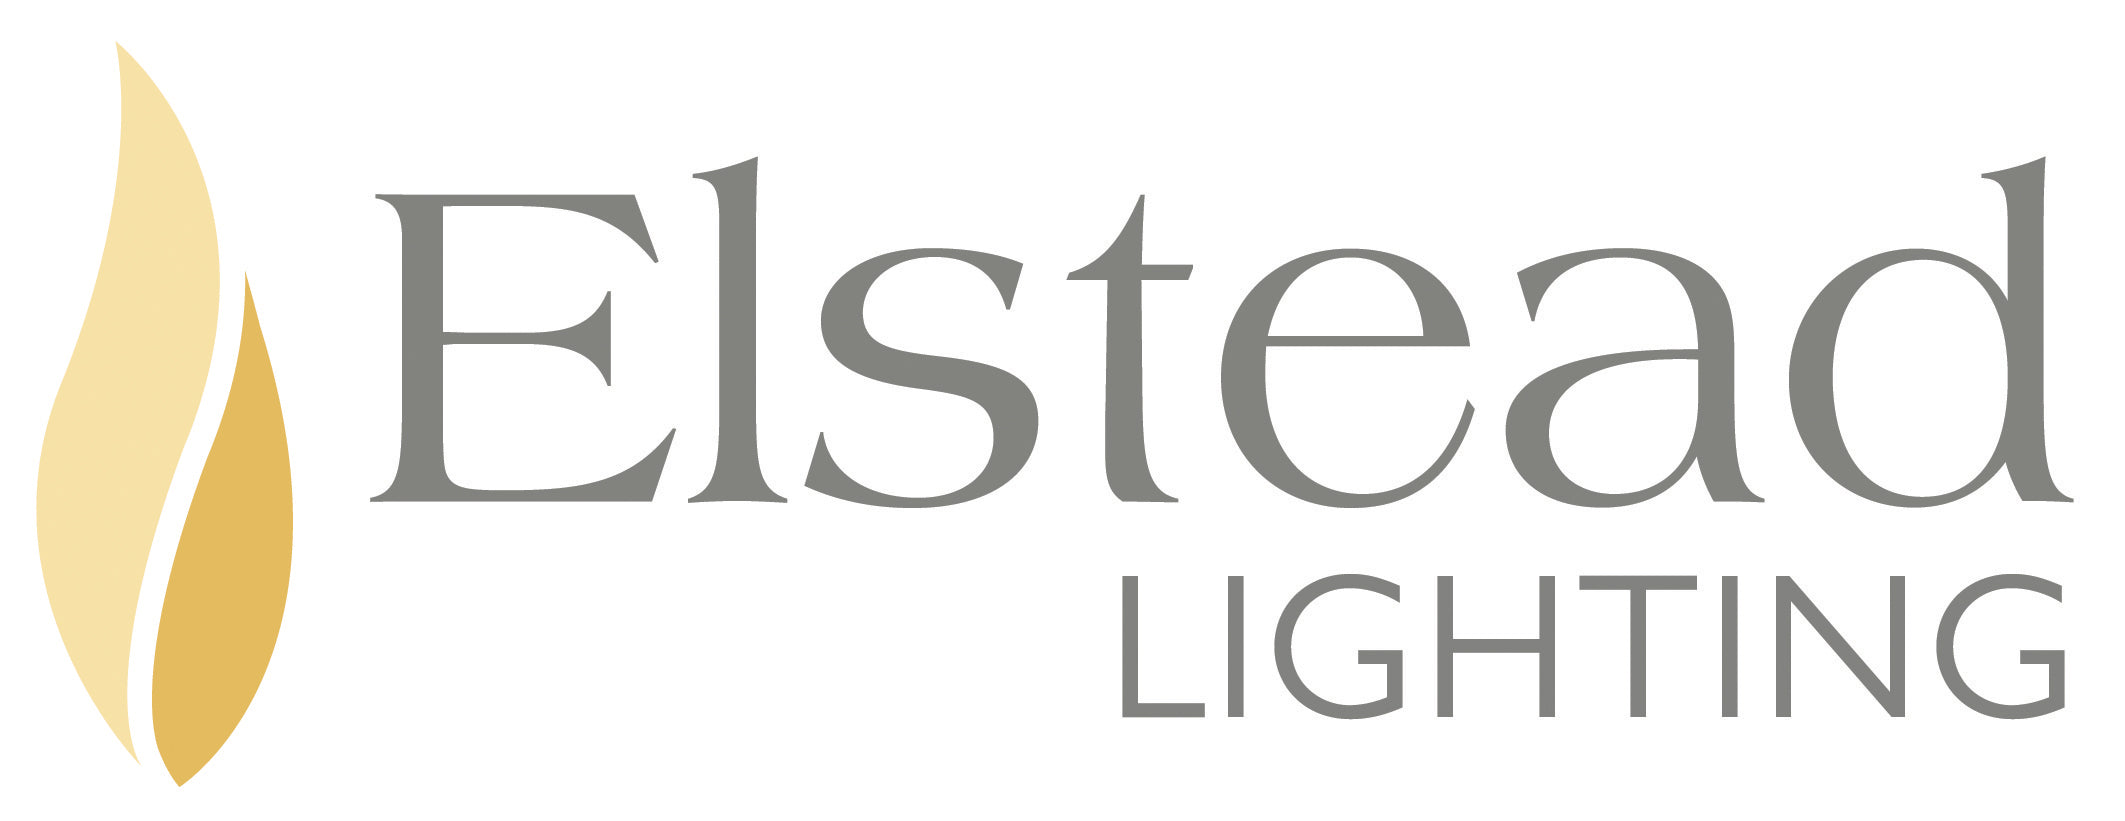 Elstead Lighting from Top Secret Furniture, Holmes Chapel, Cheshire